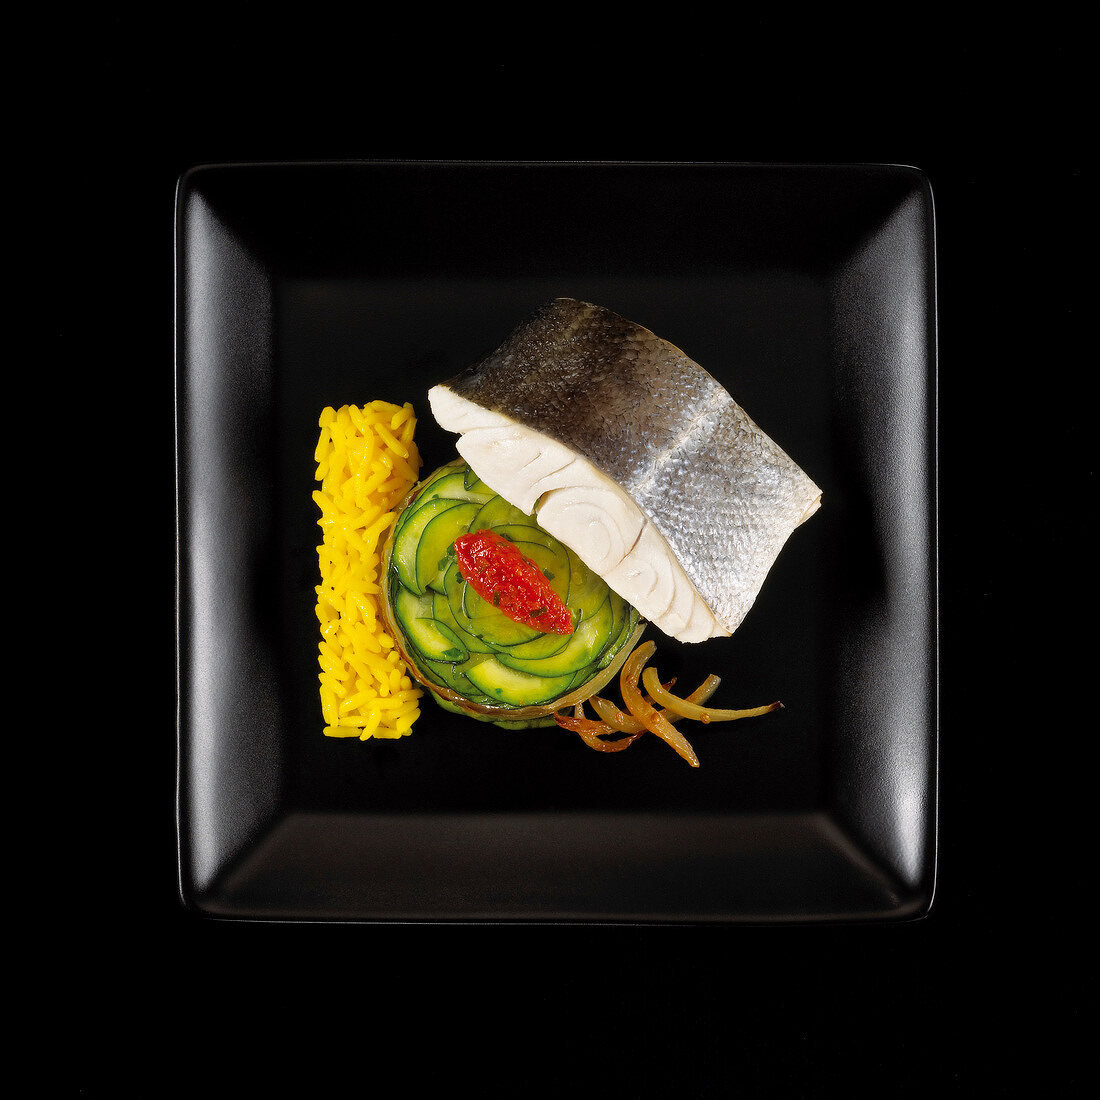 Steamed pike-perch,zucchinis and saffron rice on a black background